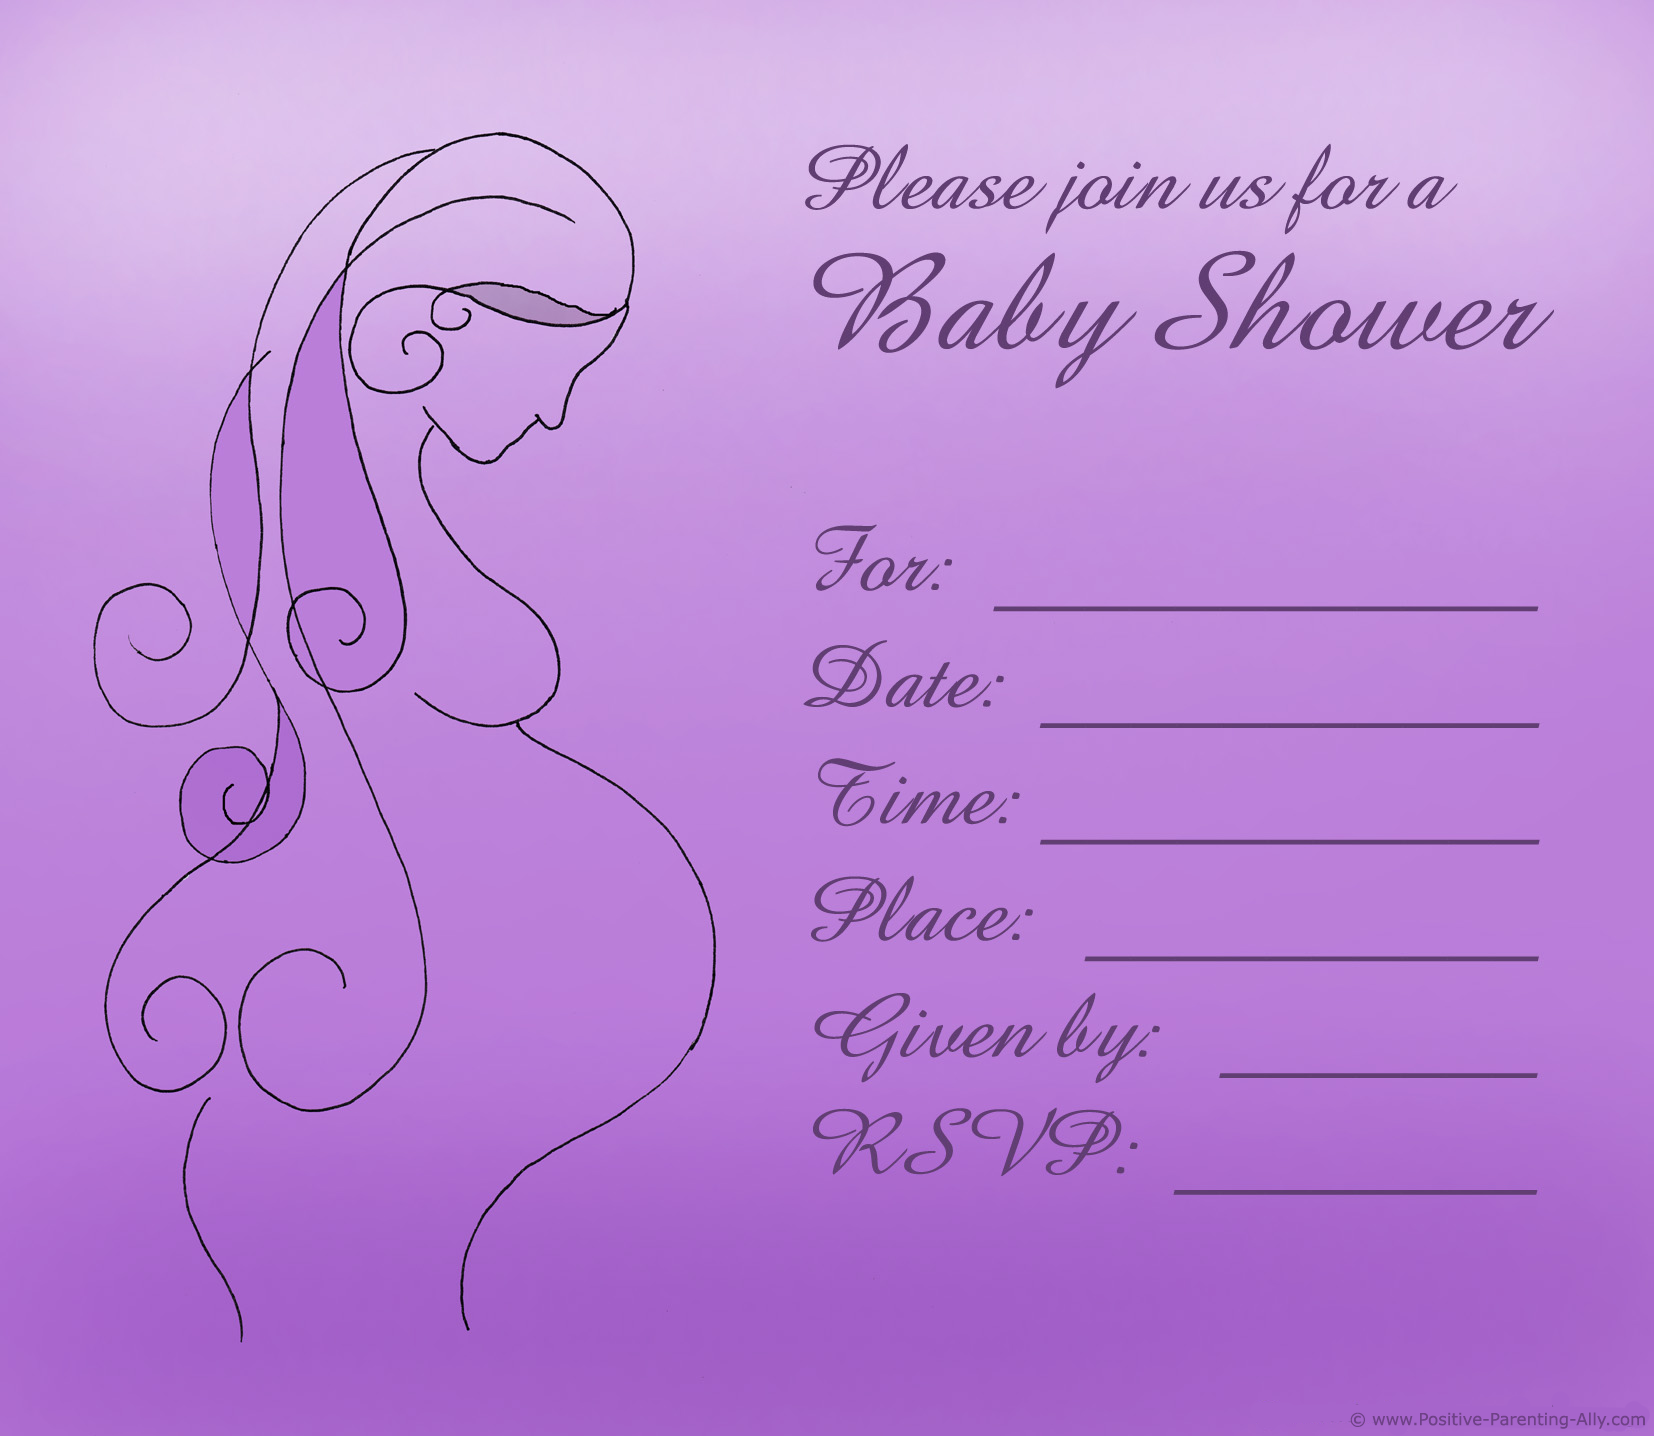 Printable baby shower invitation template with pregnant belly woman contour or silhouette on purple background.